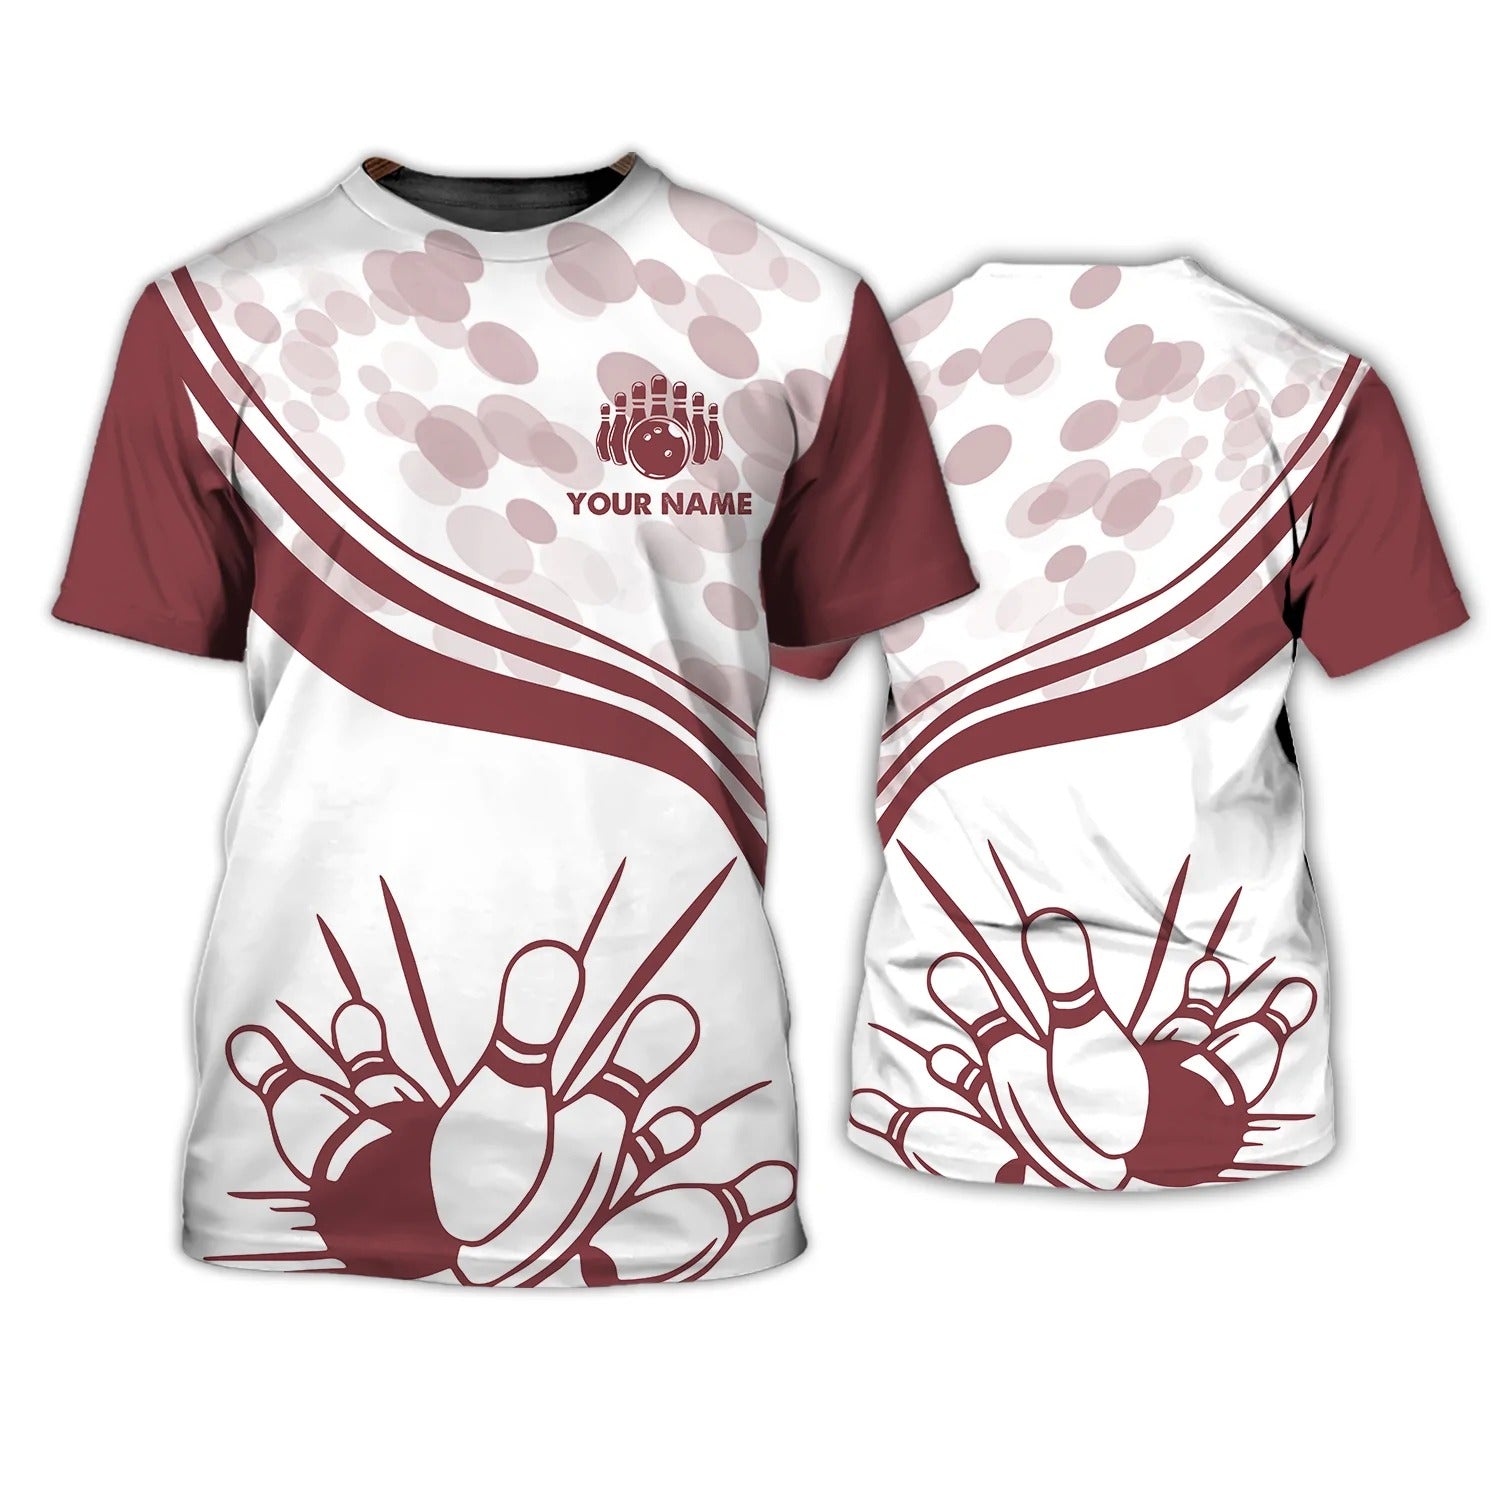 Personalized Bowling T Shirt For Bowling National Day/ Bowling Player Gifts/ Bowling Shirts 3D